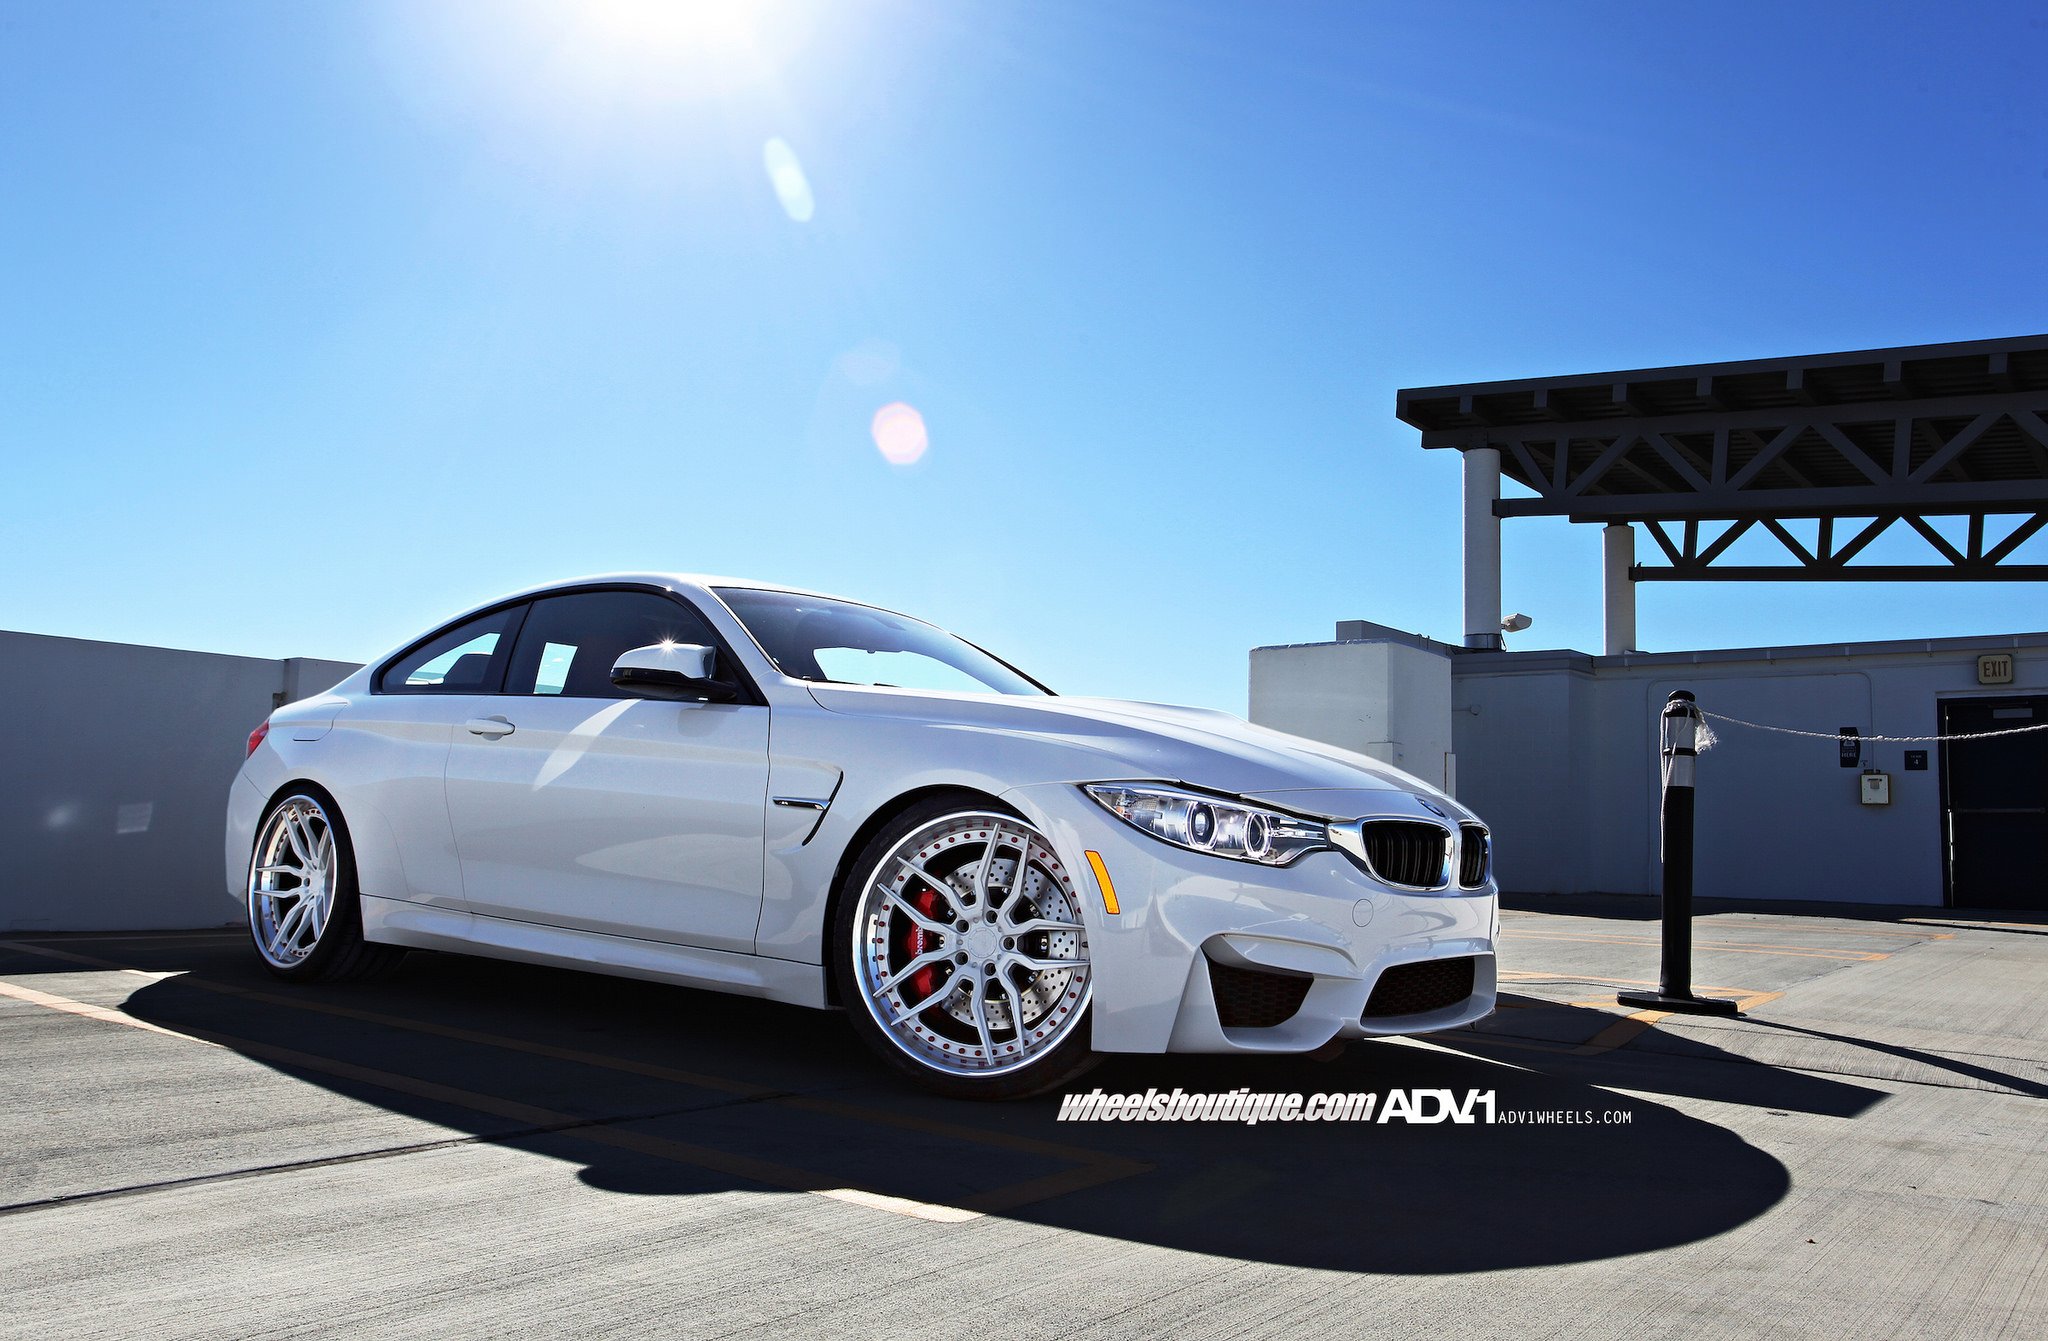 bmw, M4, Coupe, Adv1, Wheels, Tuning, Cars Wallpaper